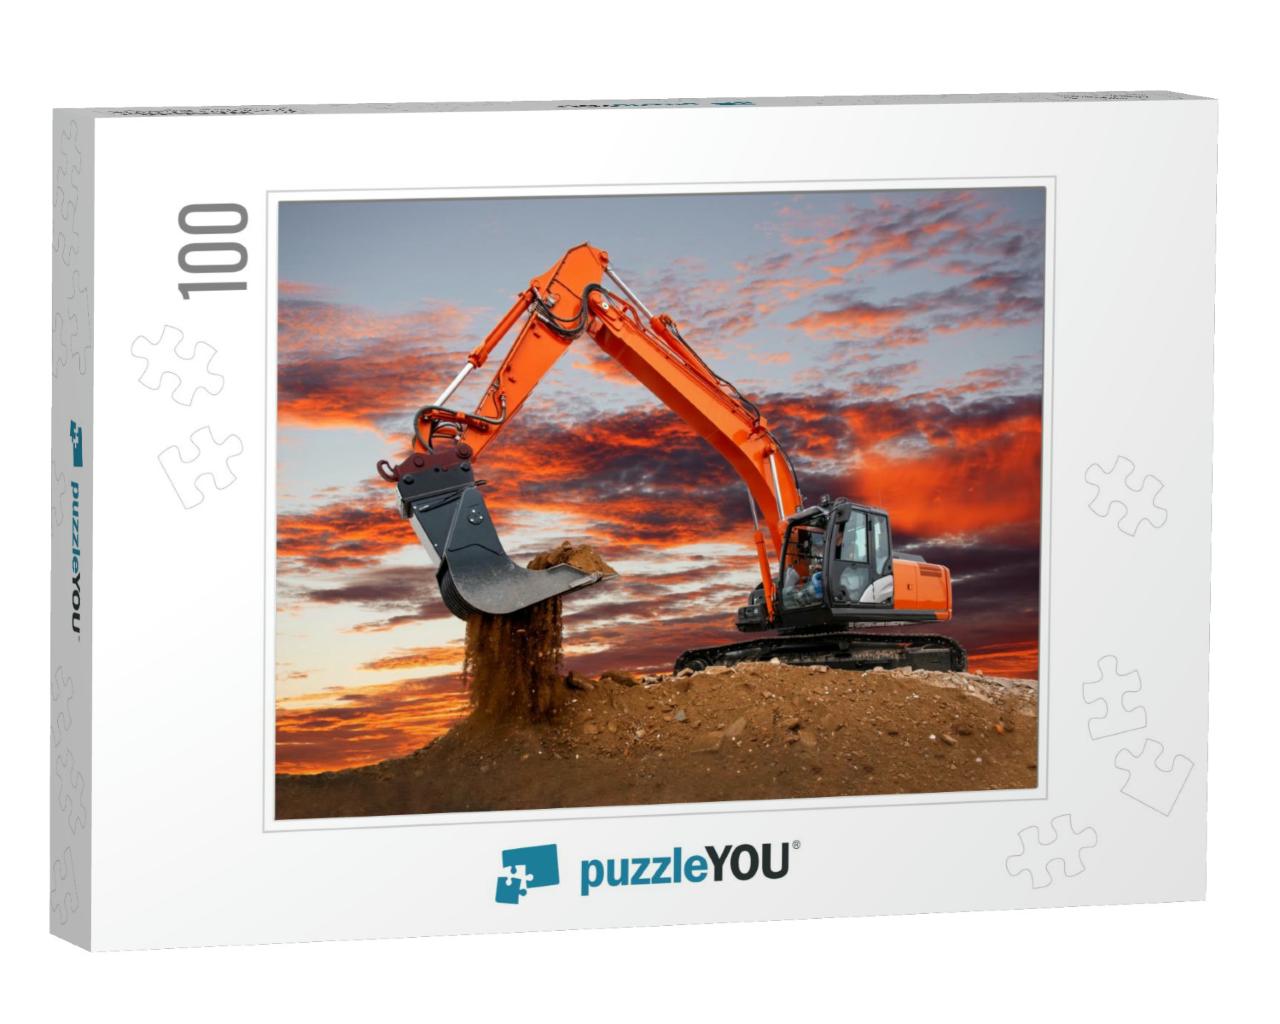 Excavator At Work on Construction Site... Jigsaw Puzzle with 100 pieces